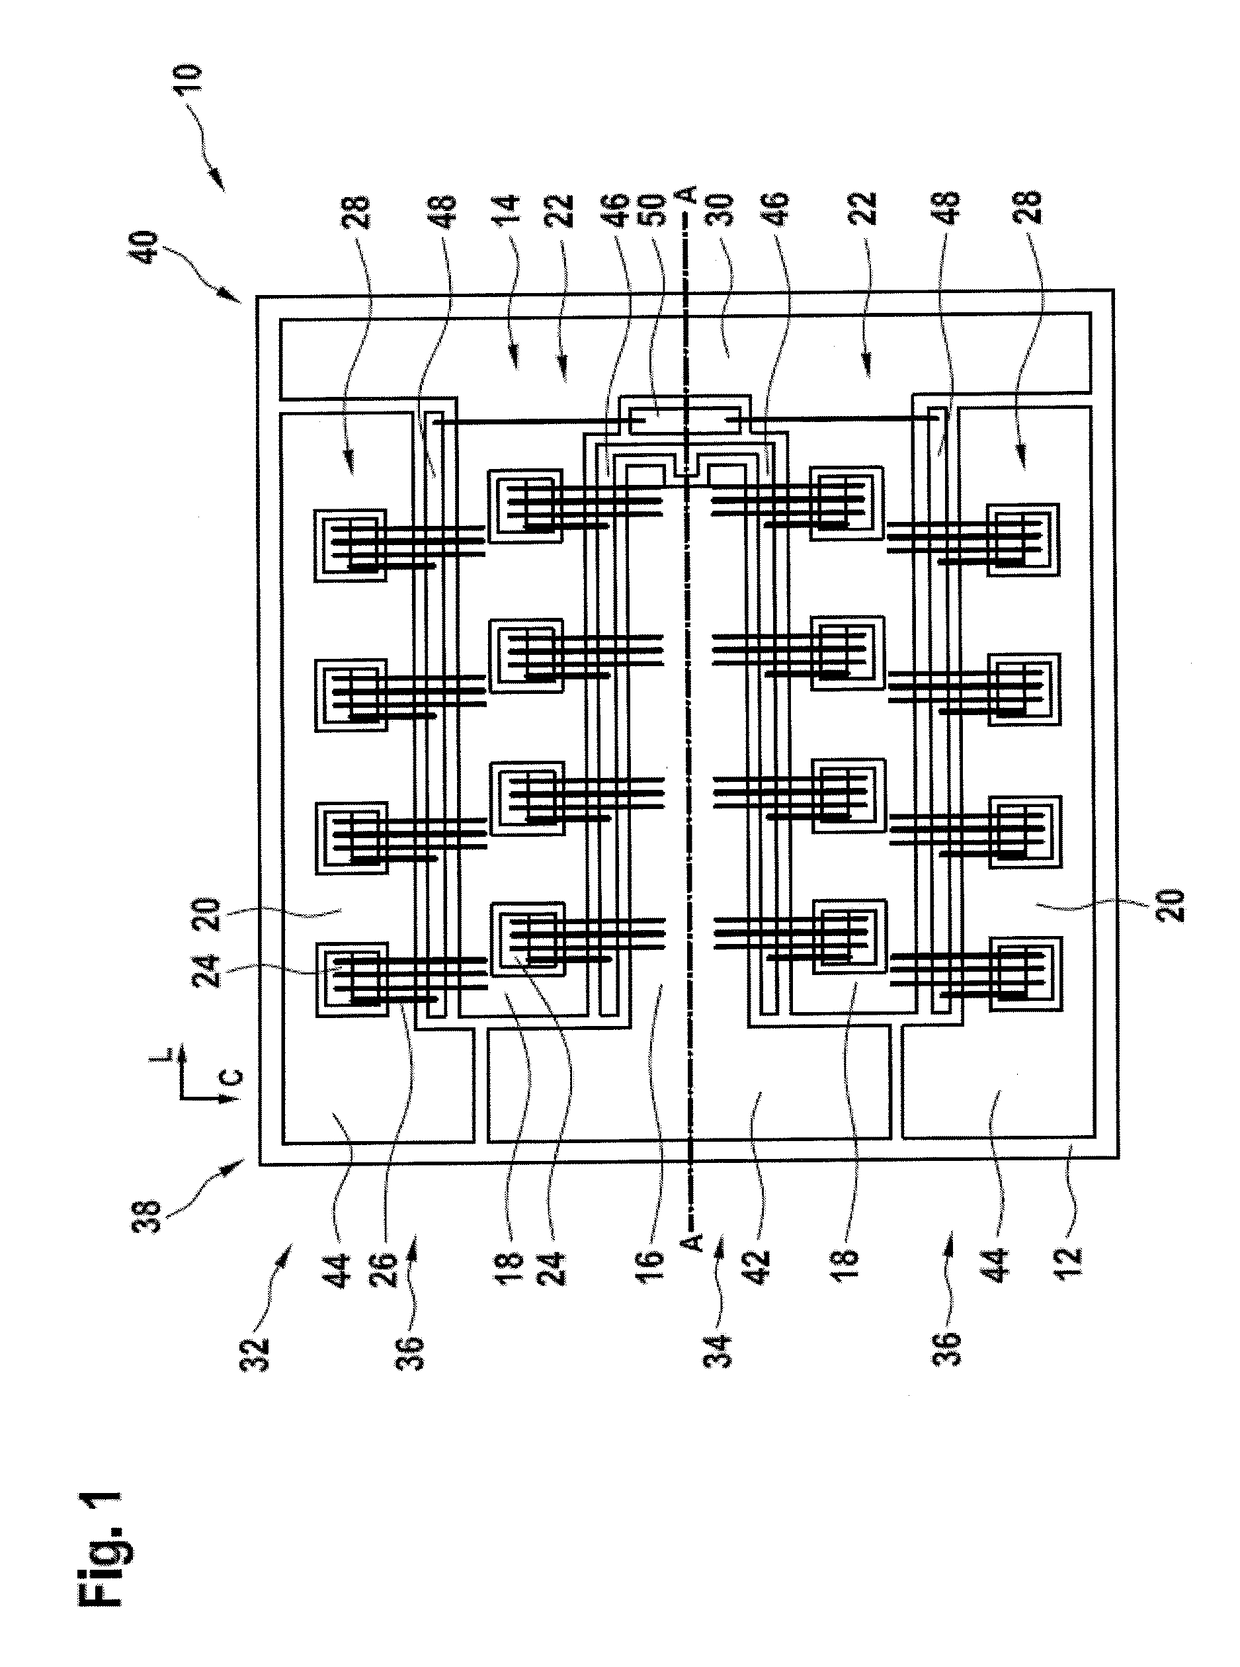 Power module with low stray inductance